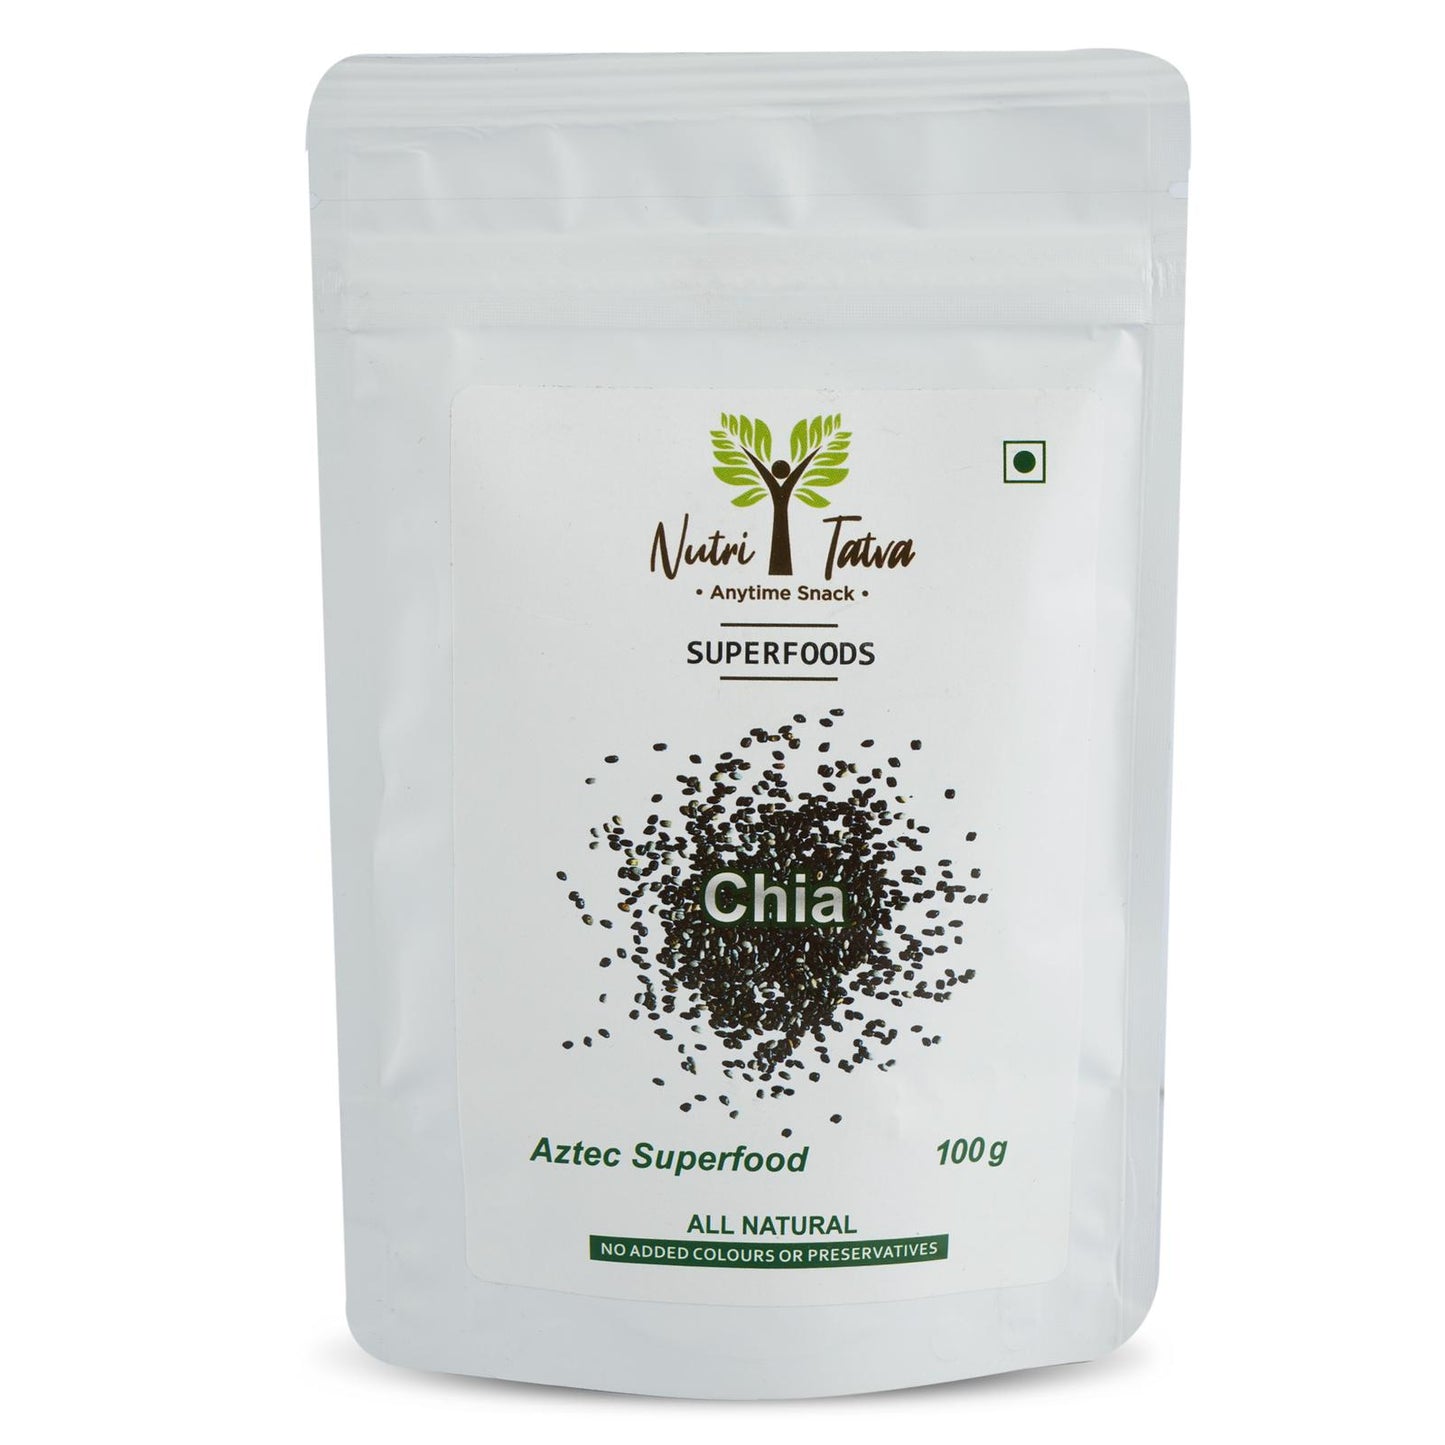 Premium Black Chia Seeds, 100 g - Rich in Omega 3 and Fibre - For weight-loss